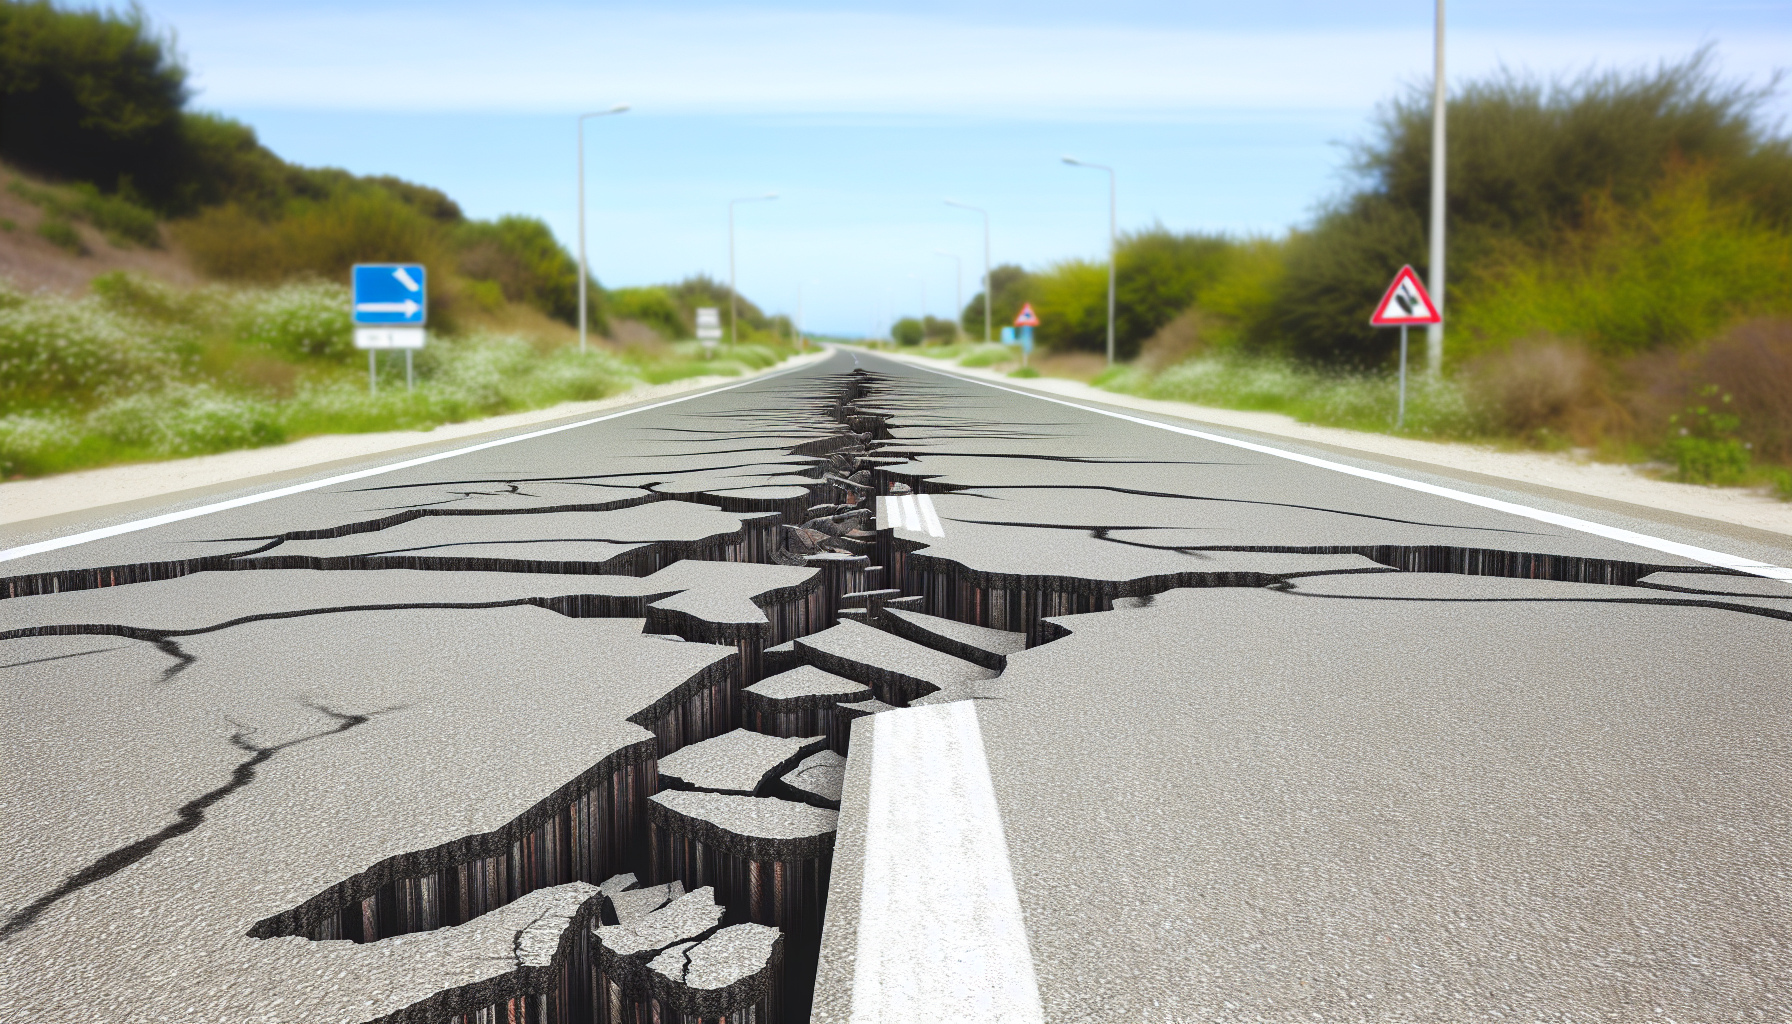 A road has a crack down the center, where the road has crumbled after an earthquake.